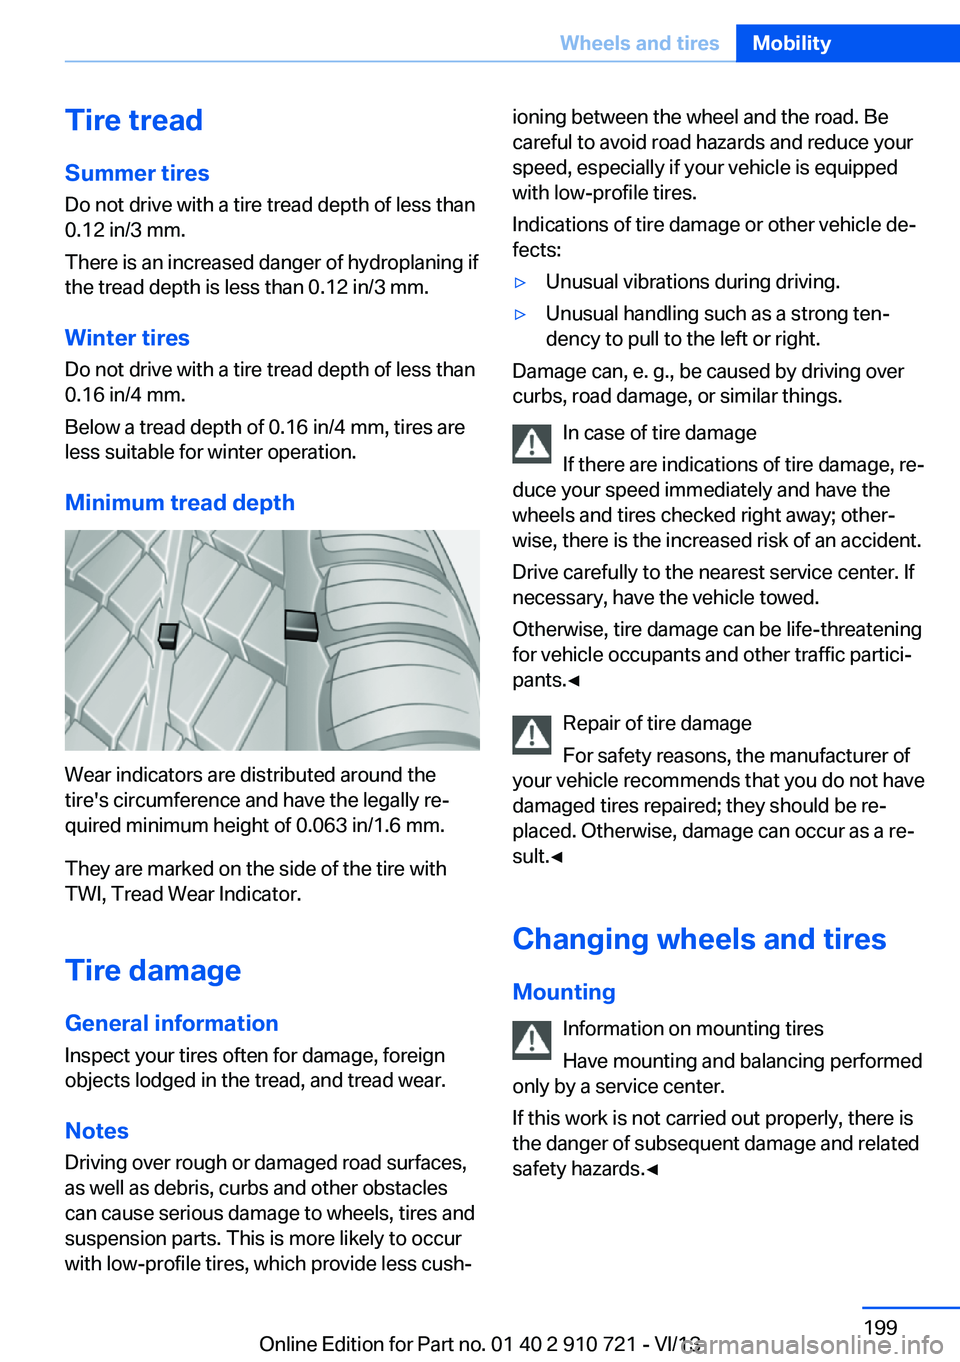 BMW 640I CONVERTIBLE 2014  Owners Manual Tire treadSummer tires
Do not drive with a tire tread depth of less than
0.12 in/3 mm.
There is an increased danger of hydroplaning if
the tread depth is less than 0.12 in/3 mm.
Winter tires Do not dr